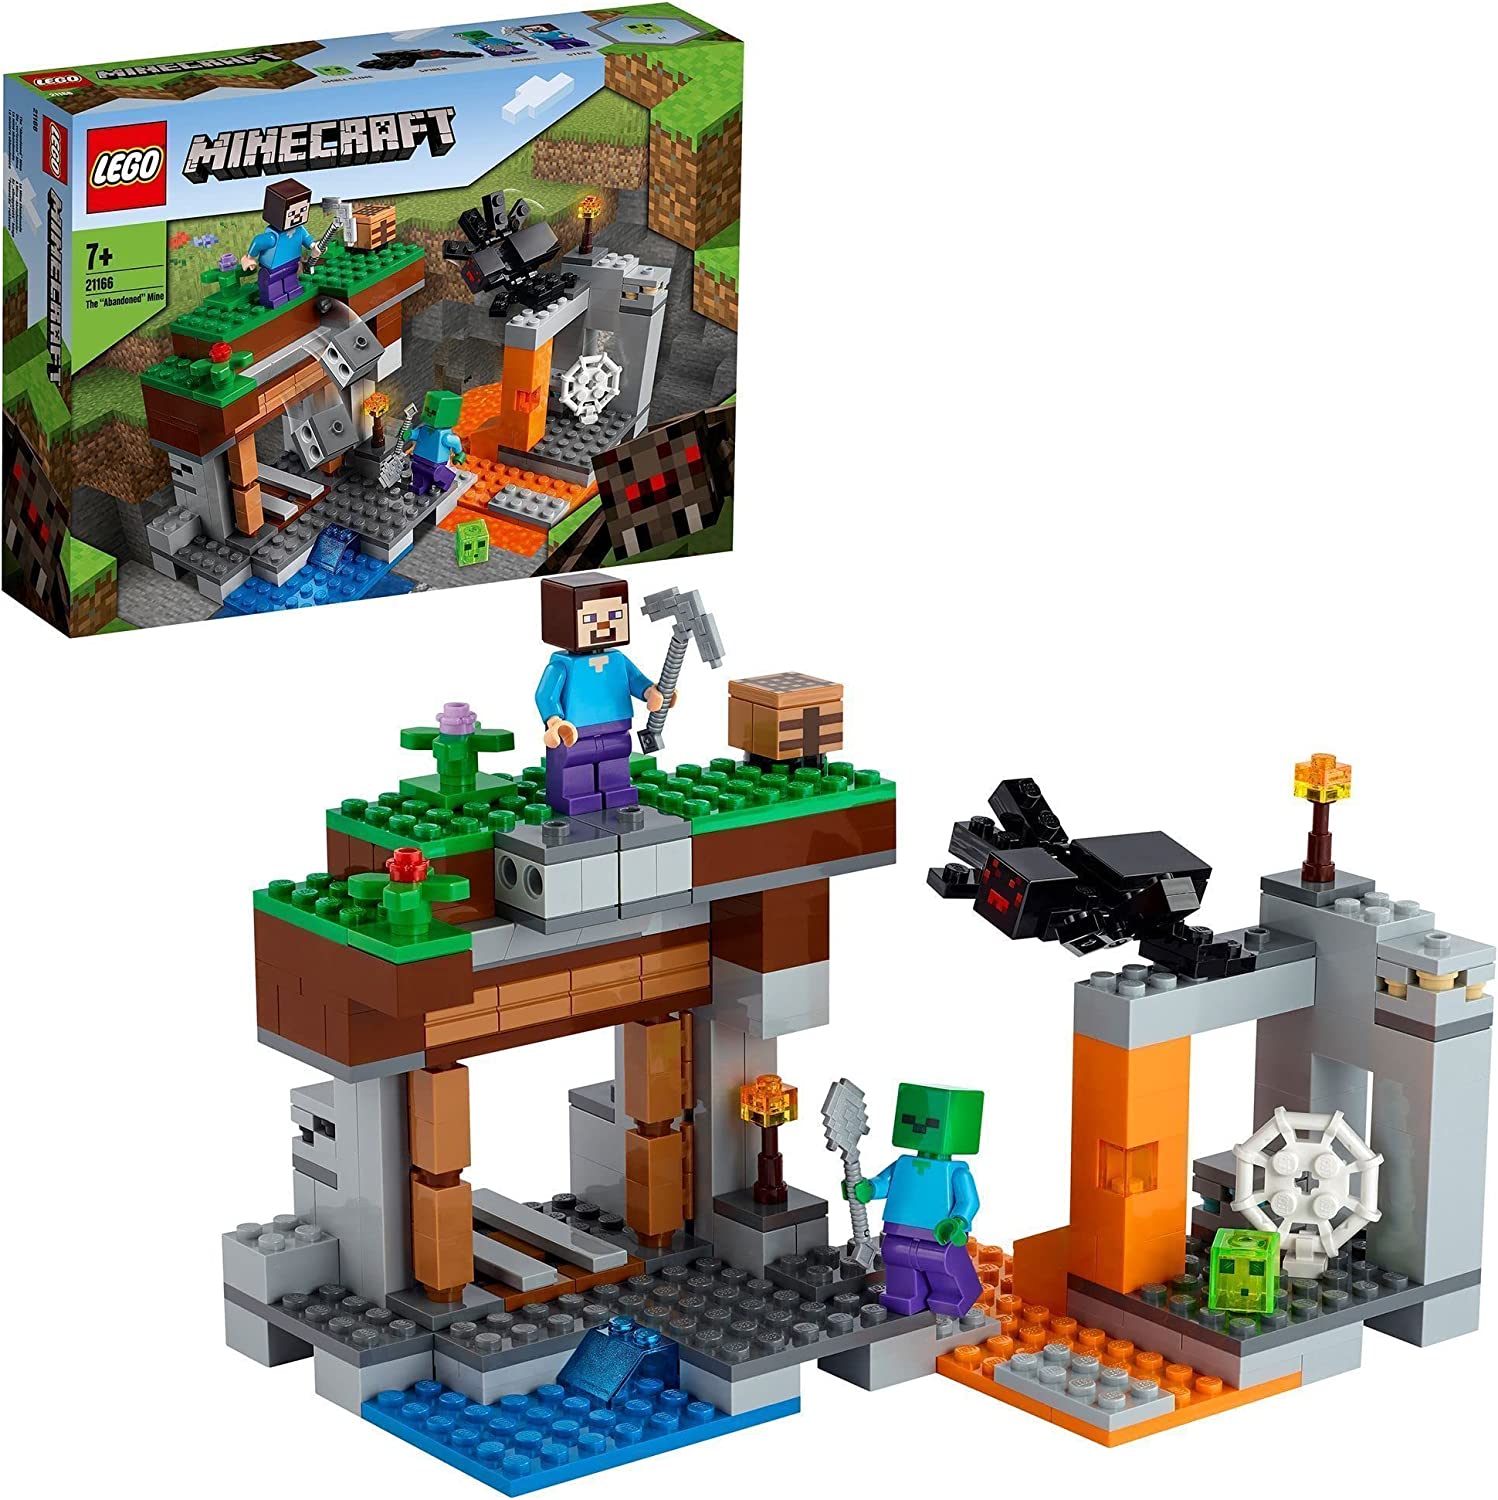 LEGO 21166 Minecraft The Abandoned Mine Construction Set, Zombie Cave with Figures: Slime, Steve and Spider